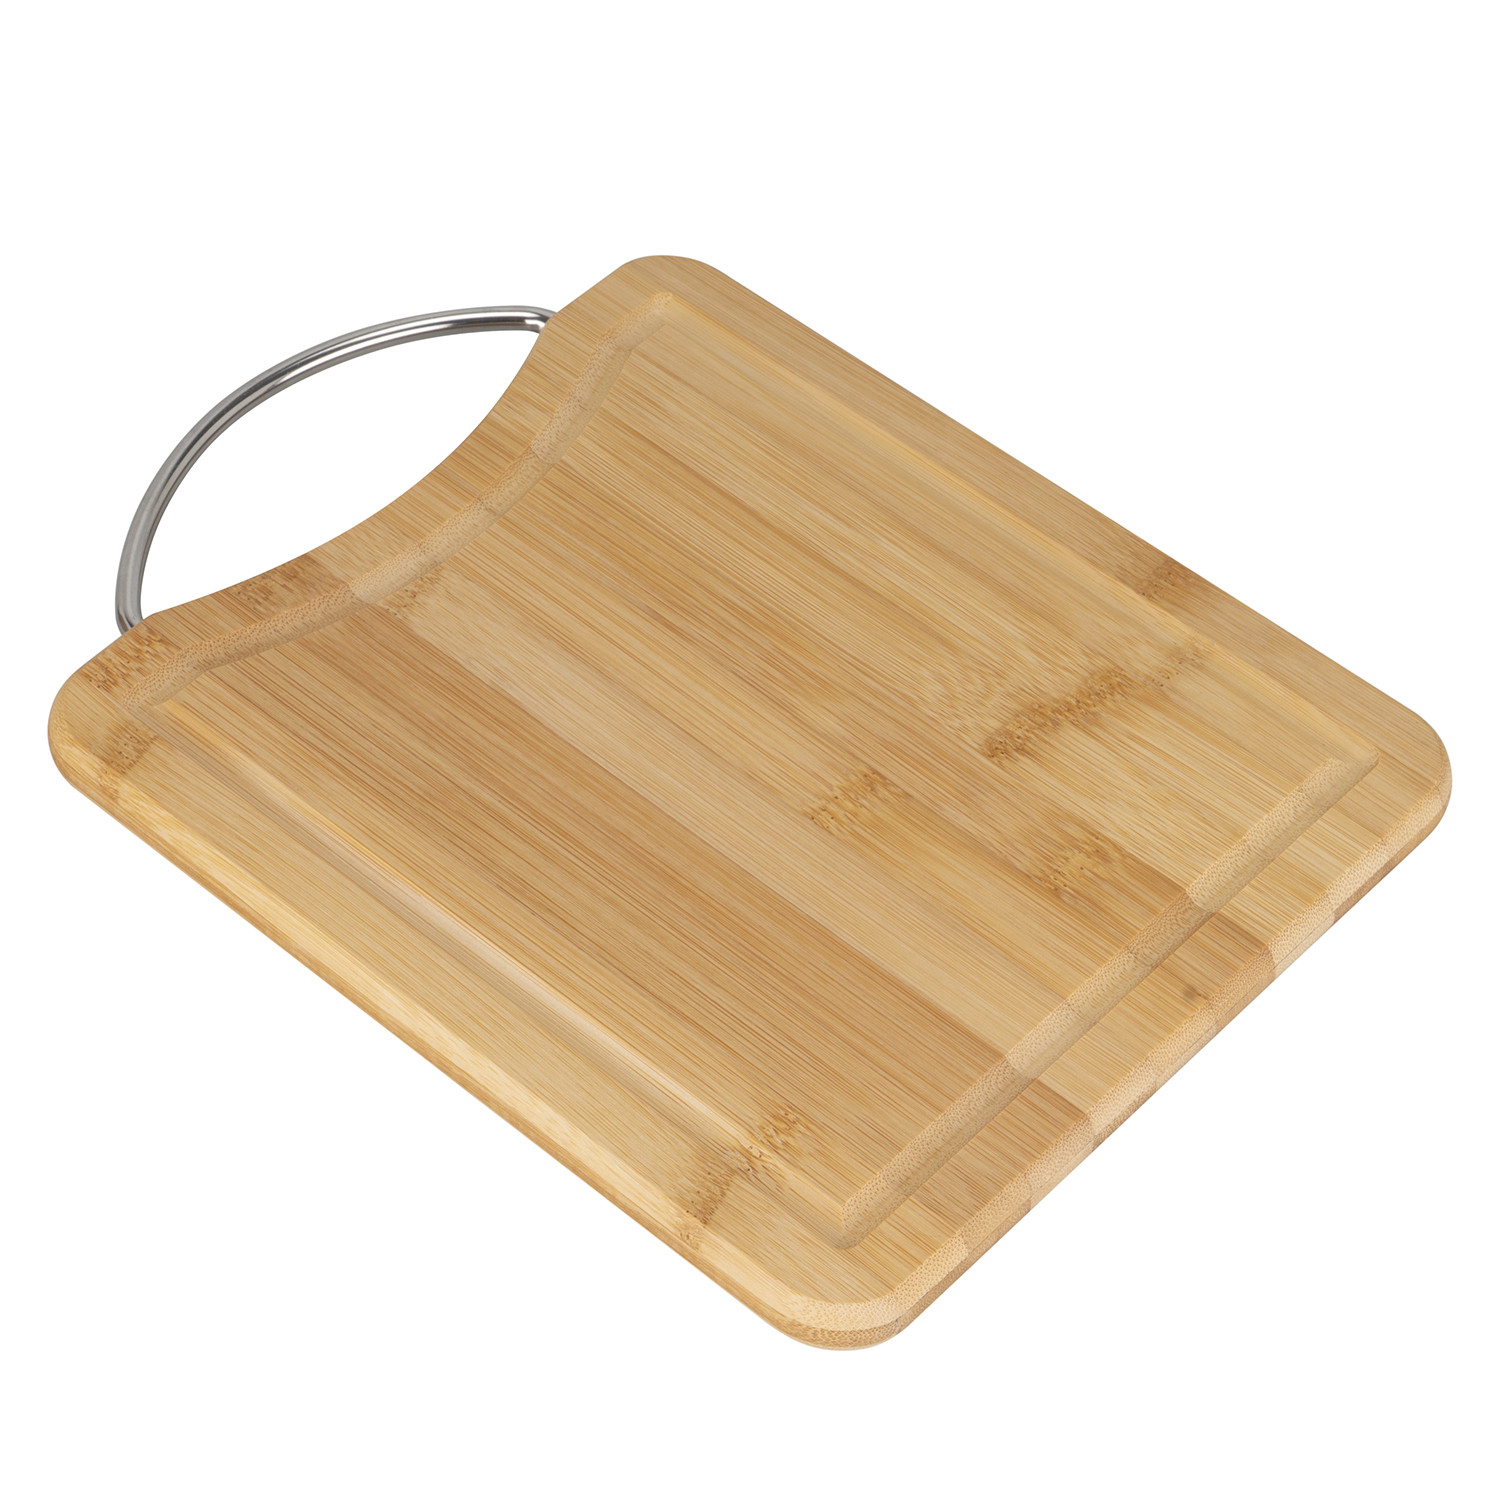 Bamboo Chopping Board with Wire Handle - Small Image 2